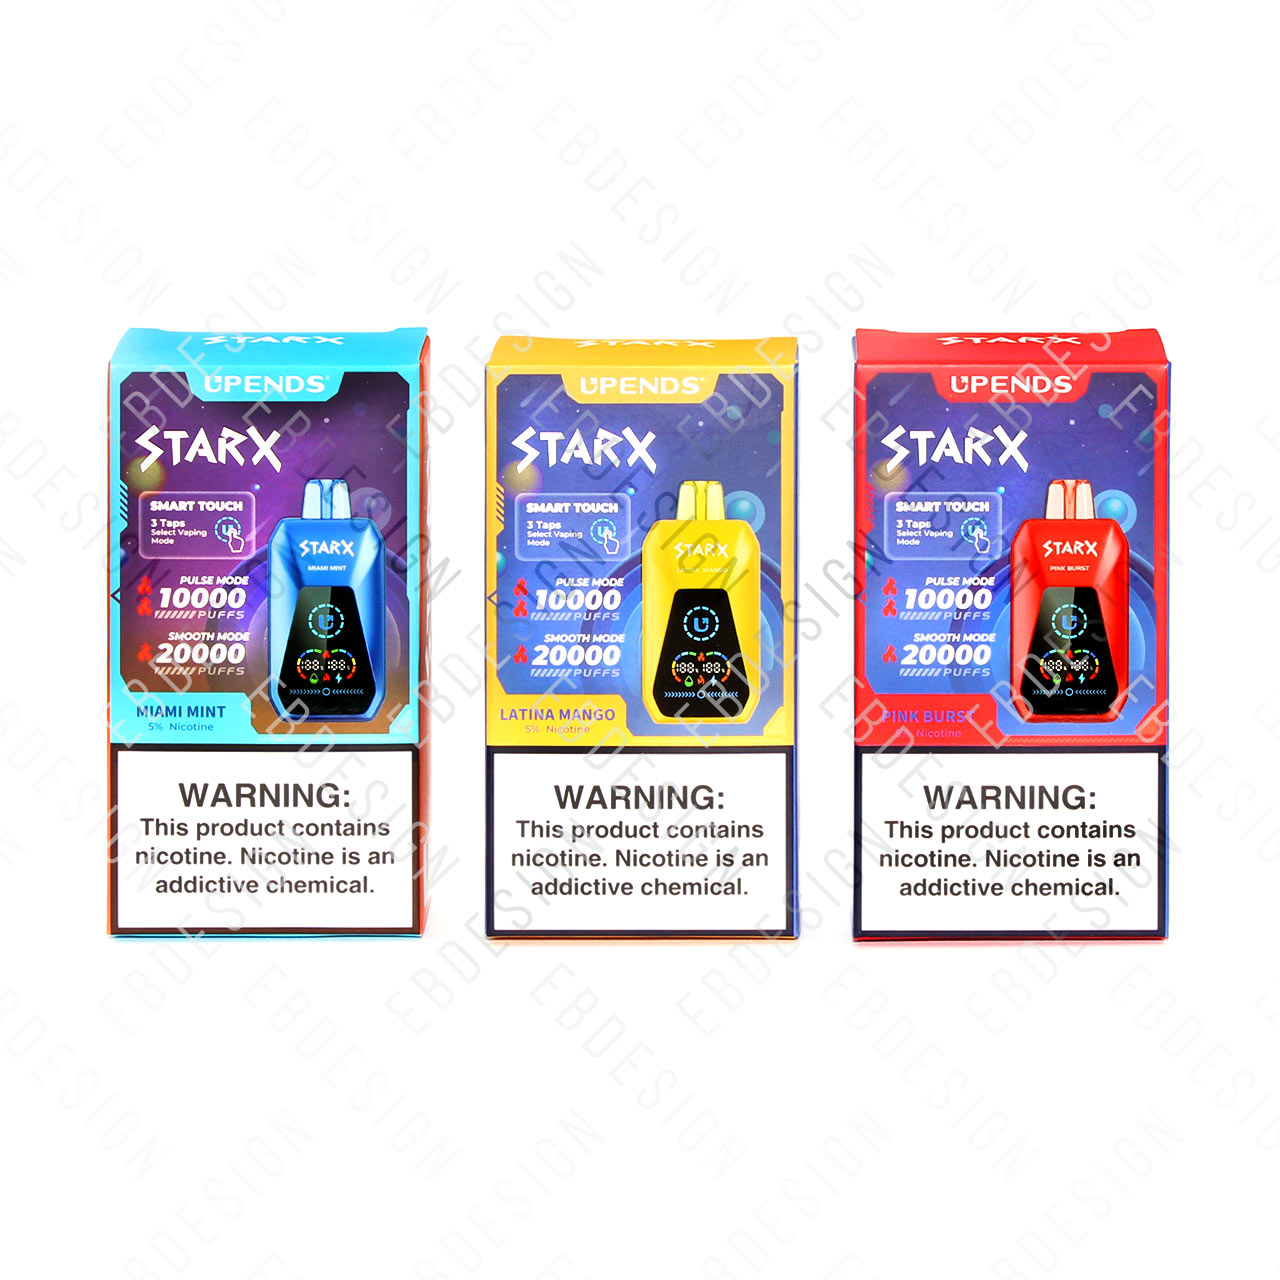 STARX S20000 Vape | Powered by Upends| STARX 20K puffs Official 